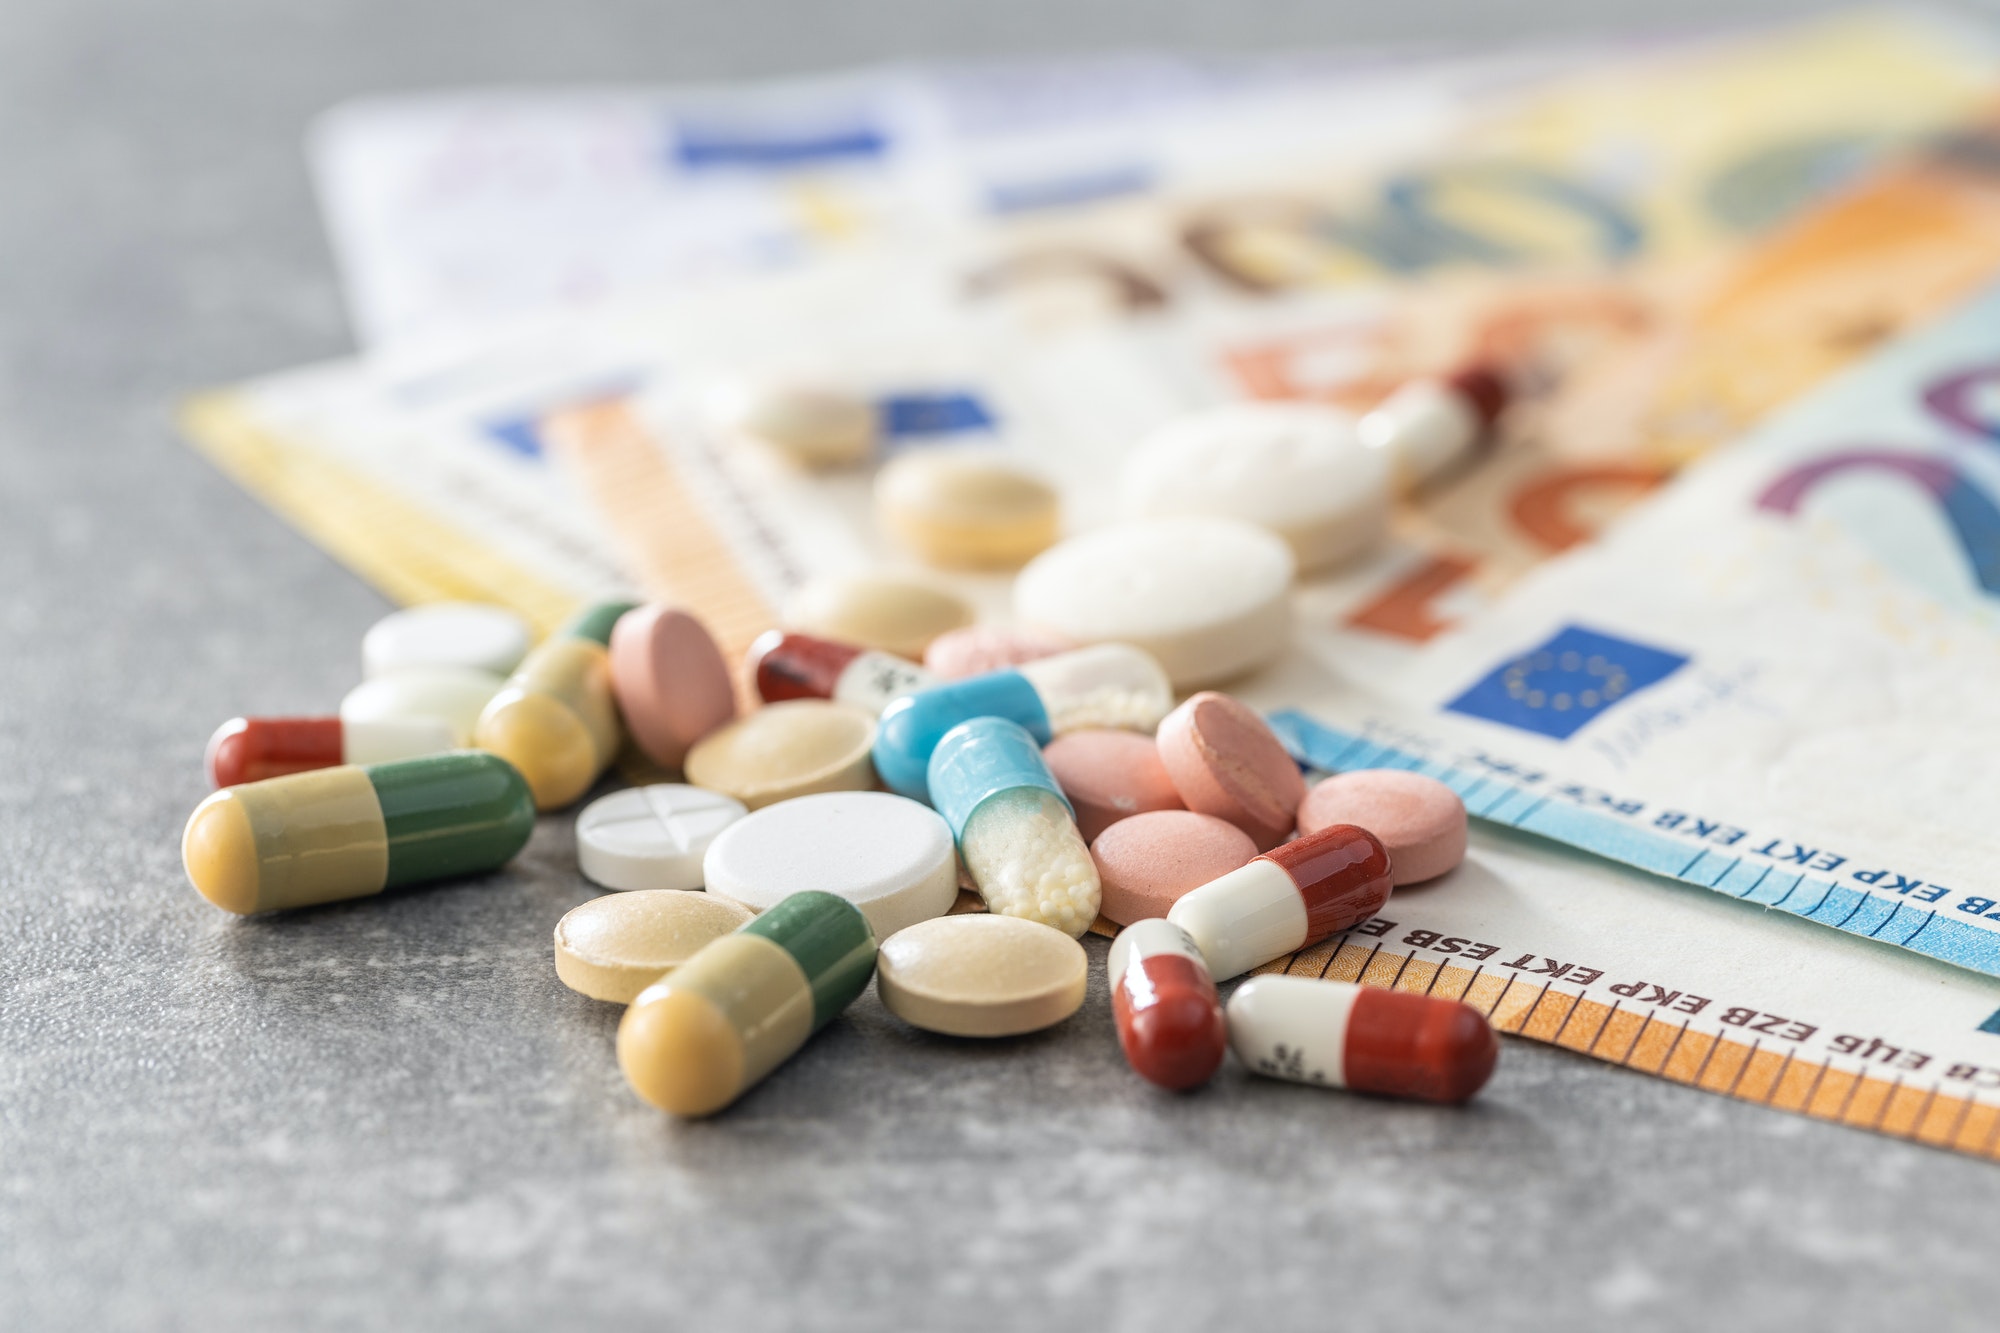 Euro banknotes and pills. Concept of healthcare.